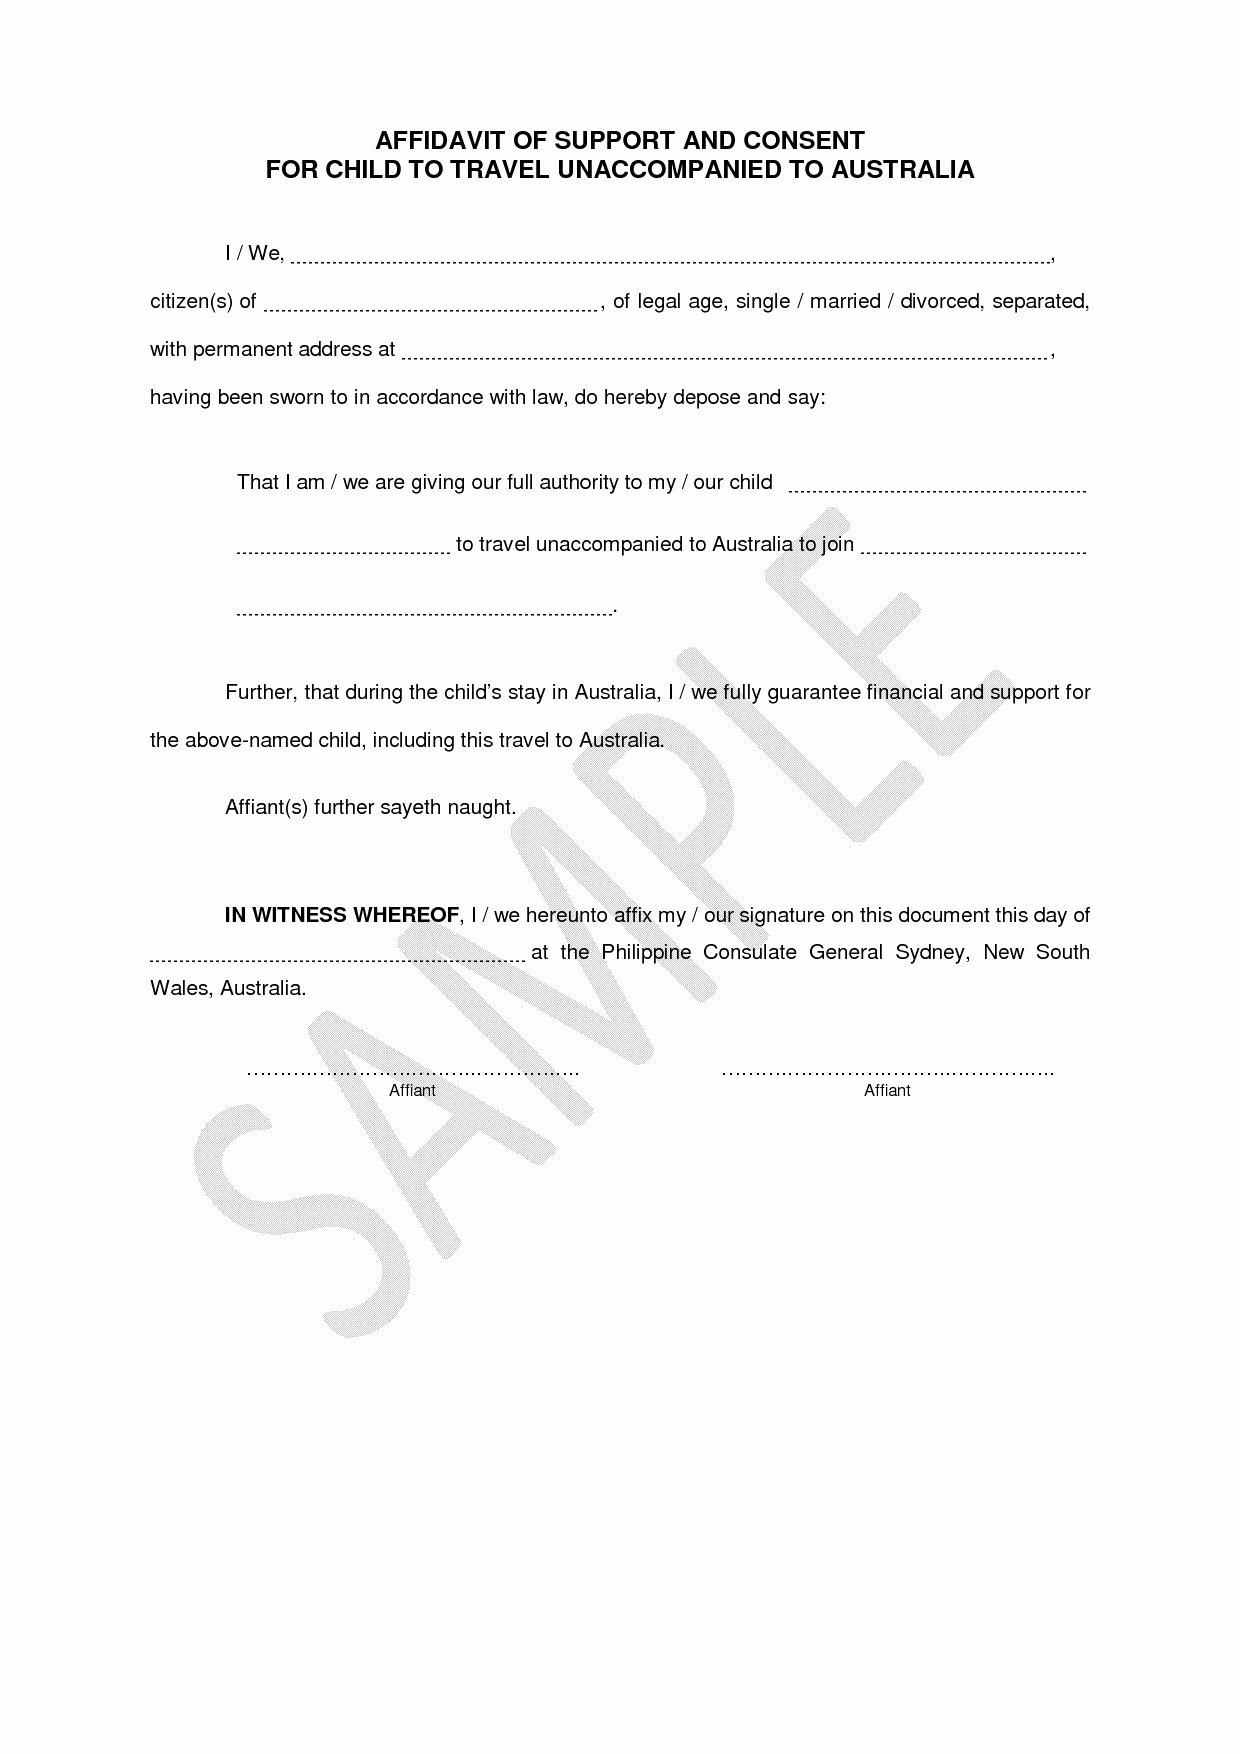 Sample Letter for Immigration Marriage Luxury Sample Affidavit Bona Fide Marriage Letter for